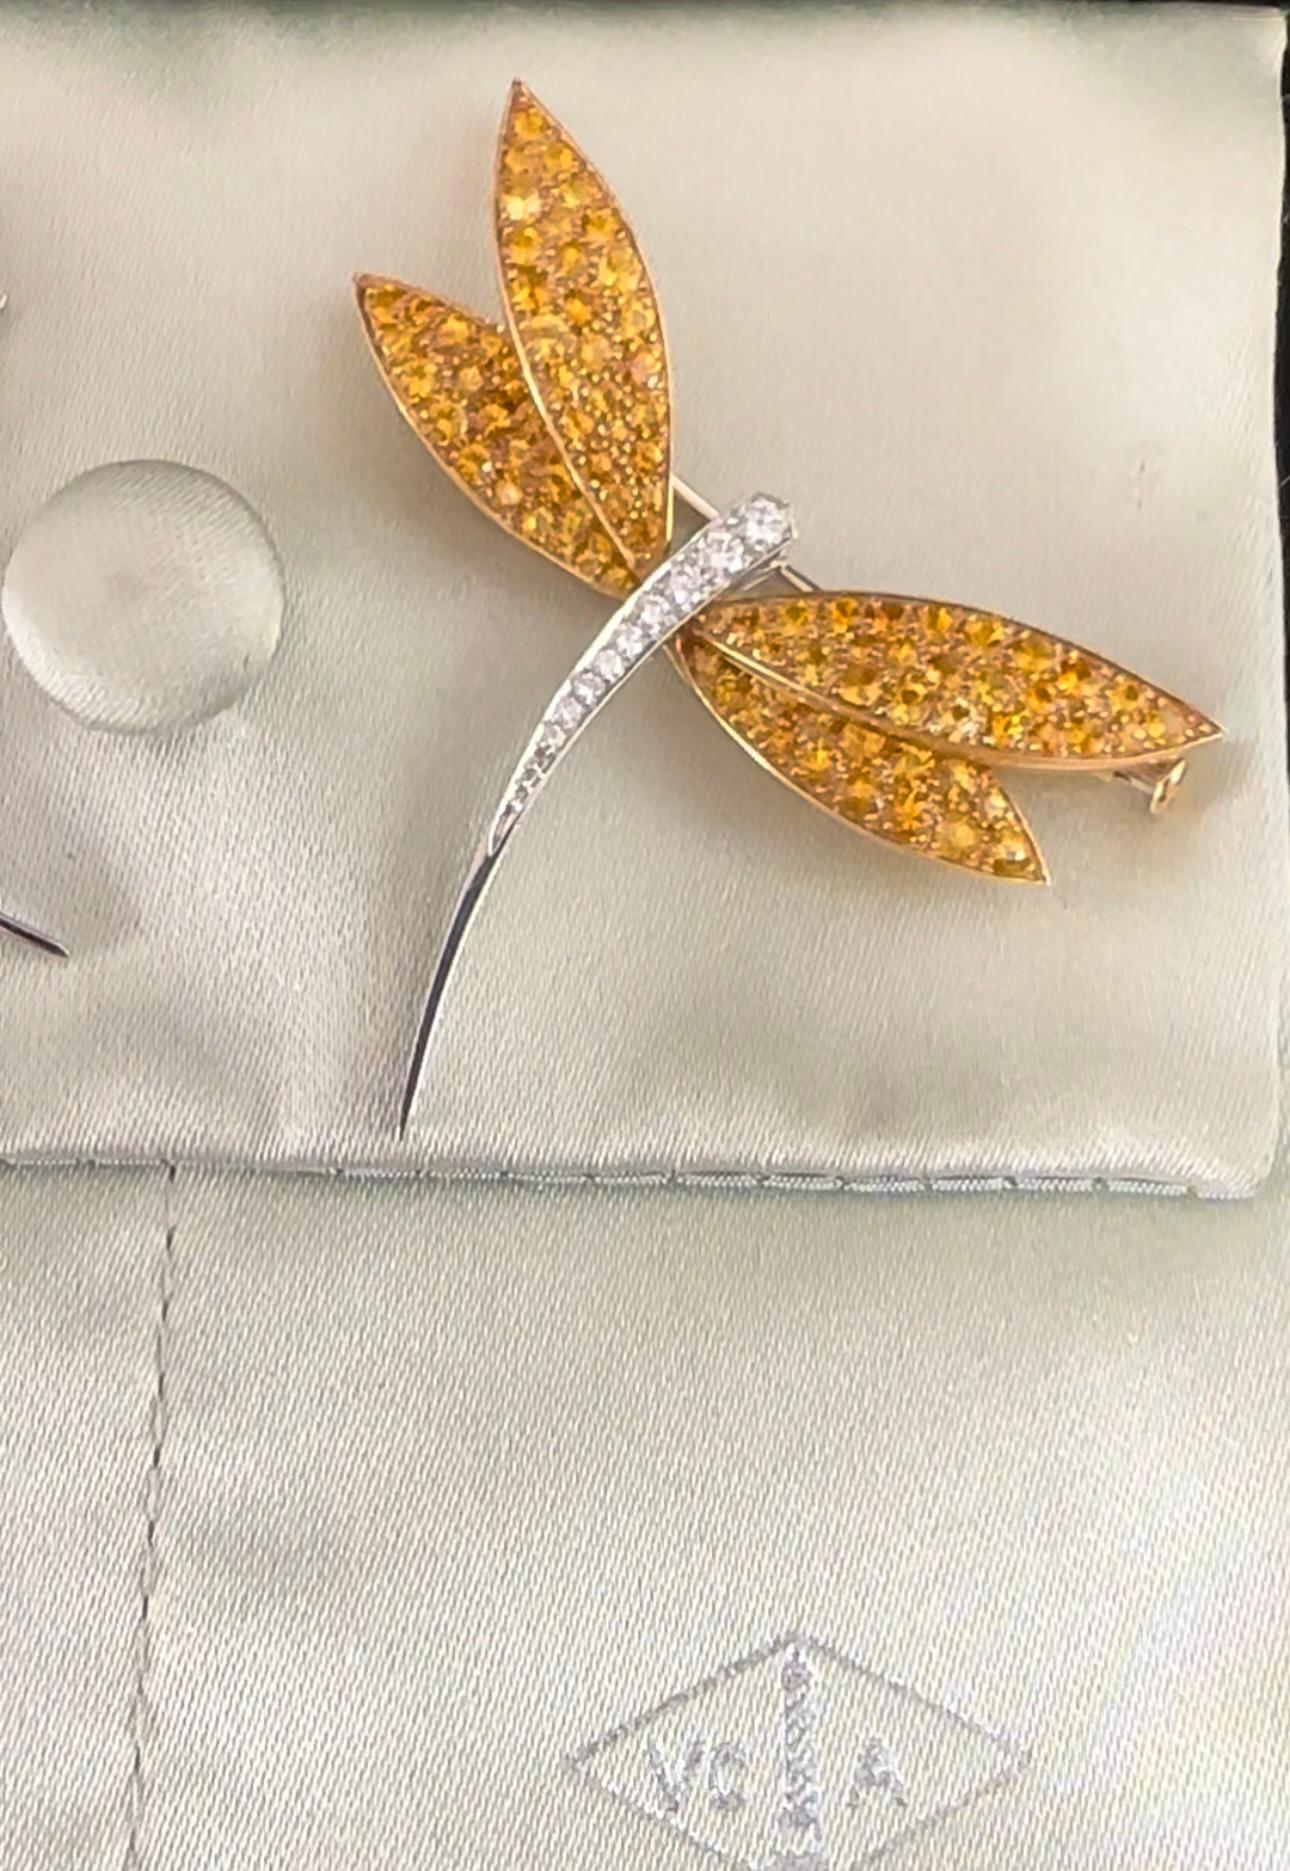 The VAN CLEEF & ARPELS Dragonfly Clip 
 Description: White gold and 18k Yellow Gold Dragonfly Clip Featuring Yellow Sapphires and Diamonds.
Specifications:

Gemstones: Yellow Sapphires Est 2.50 cts 
Diamonds. .10 cts 
Design: Dragonfly